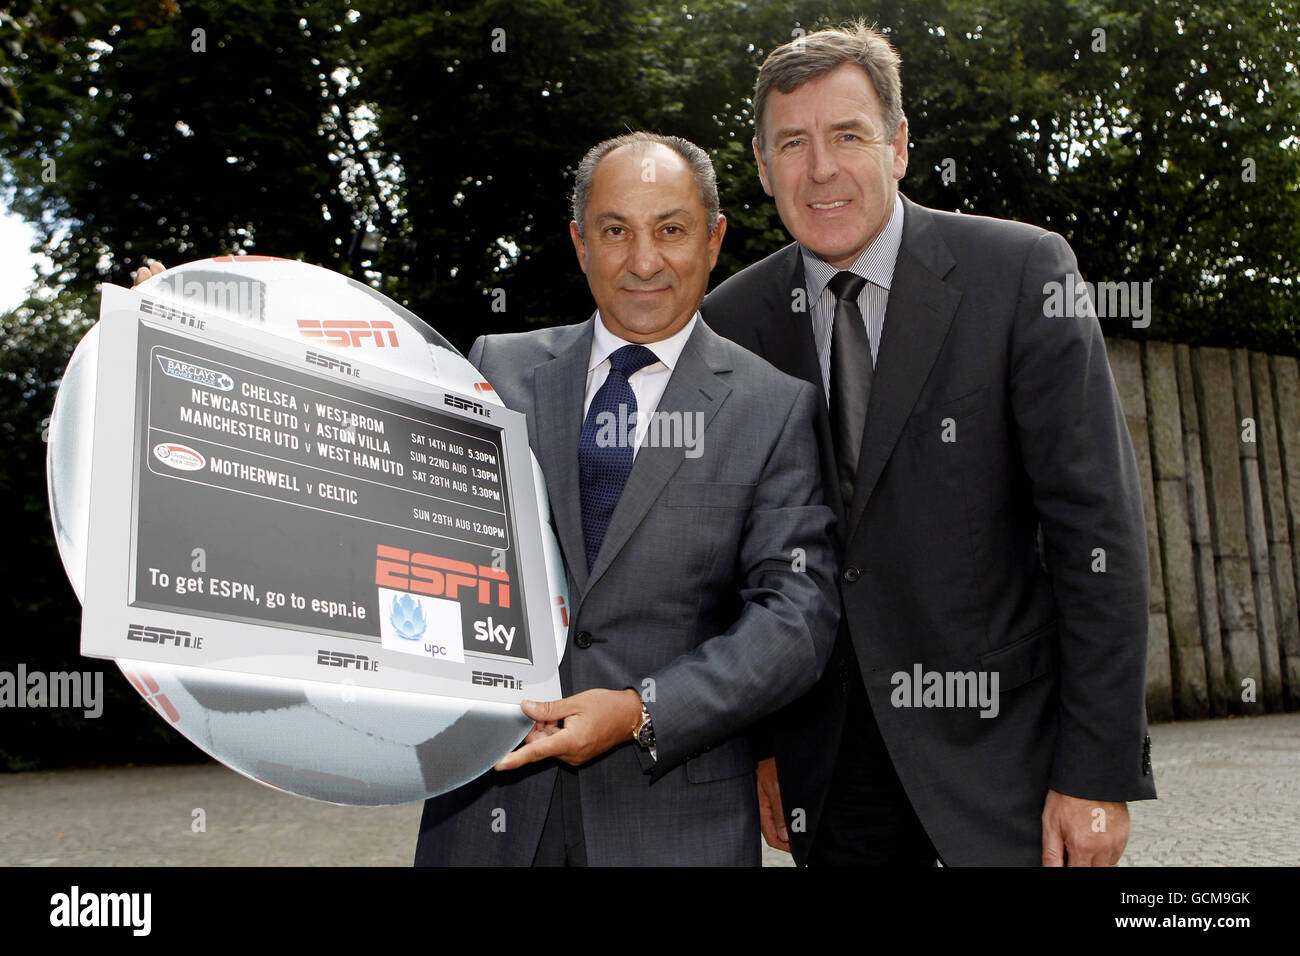 Football legends Ossie Ardiles and Pat Bonner (right) pictured together to promote the ESPN coverage of The Premier League in England and the Scottish Premier League at a press event at the Shelbourne Hotel, Dublin, Ireland. Stock Photo